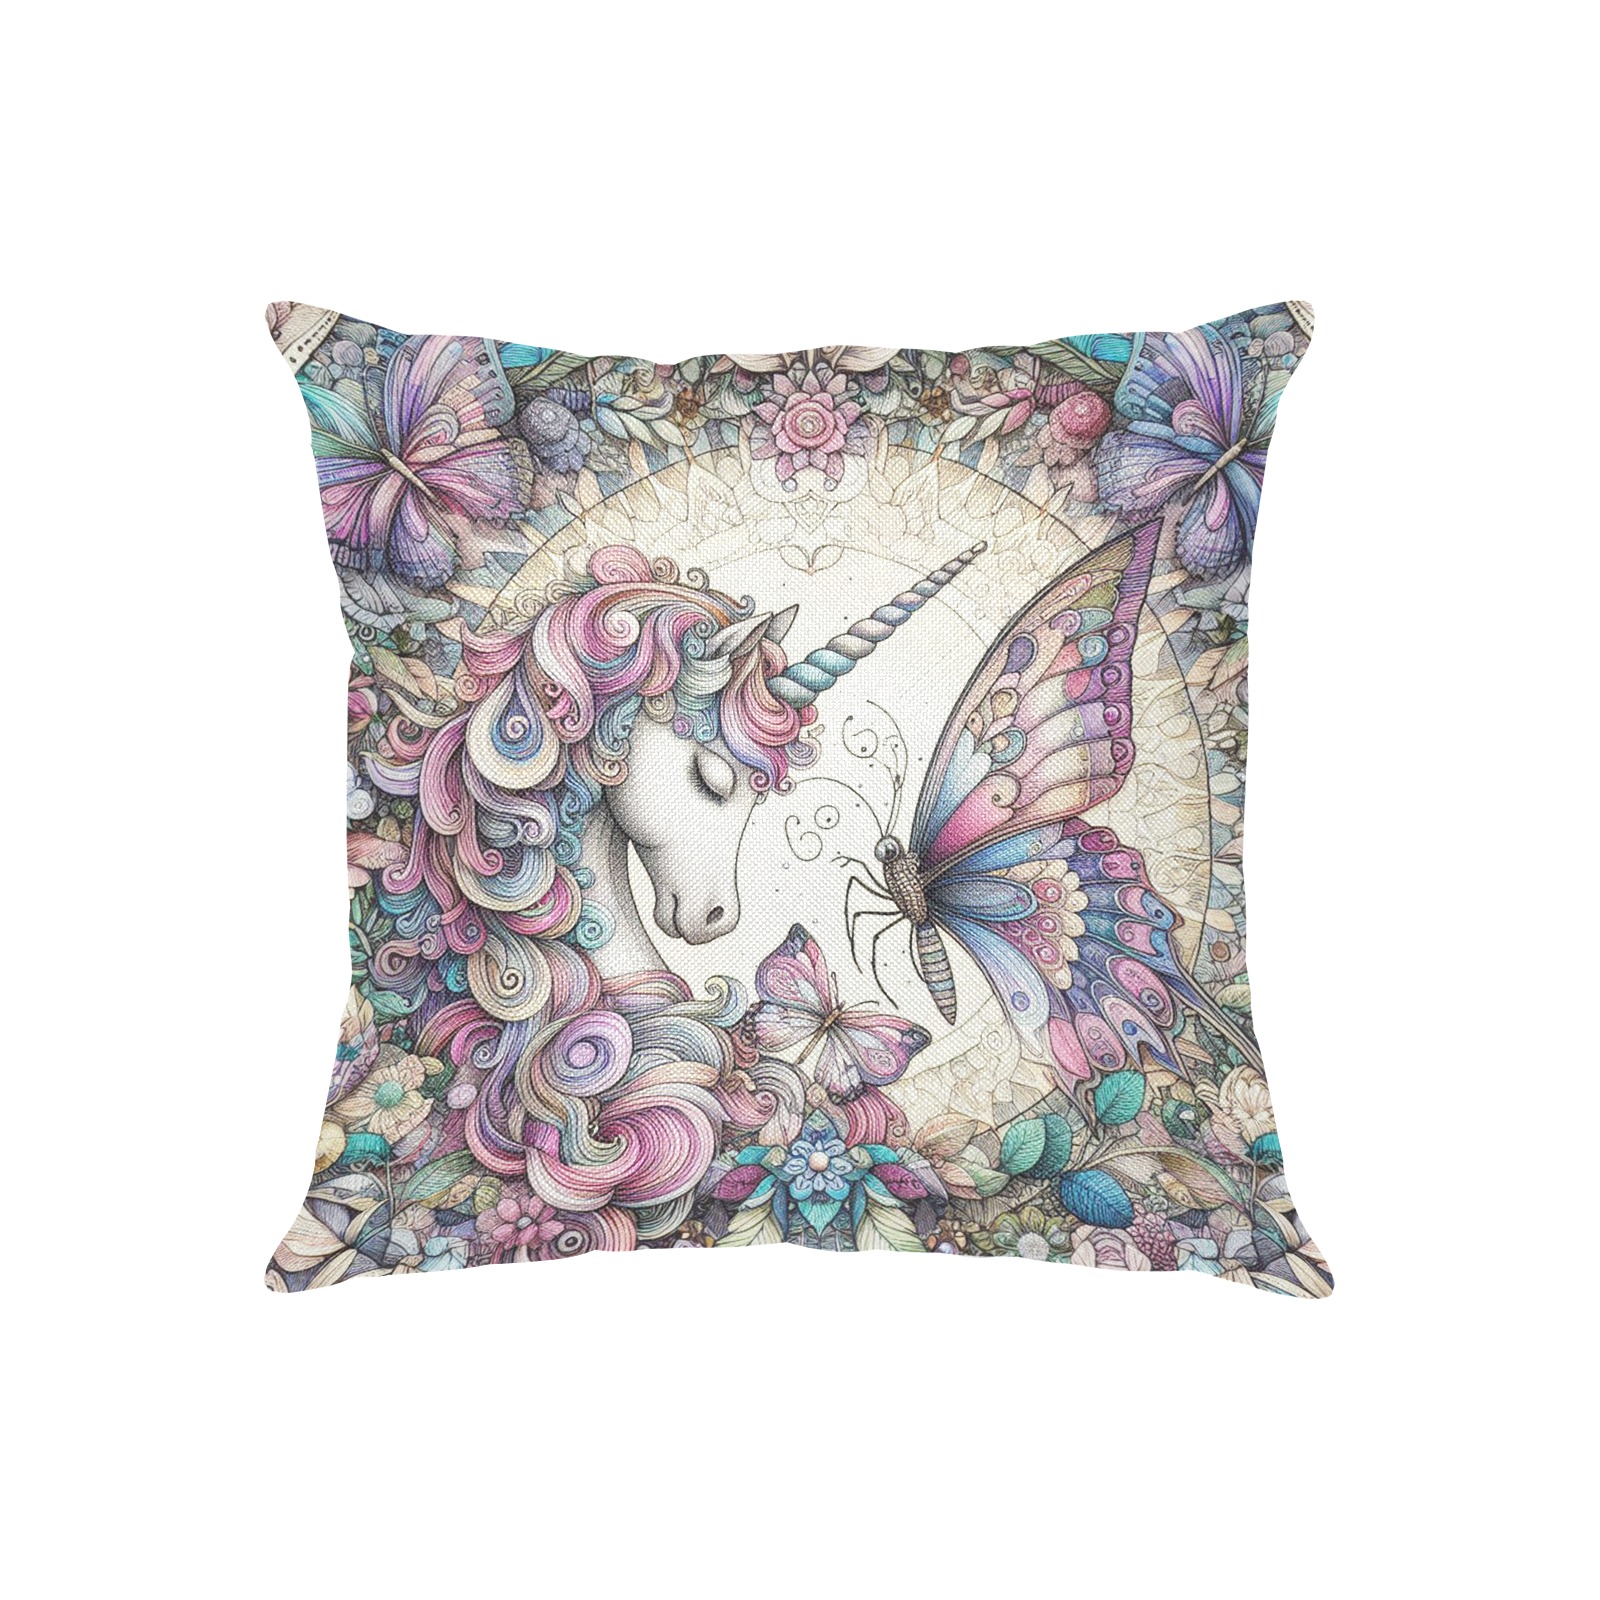 The Unicorn And Butterfly Linen Zippered Pillowcase 18"x18"(Two Sides)